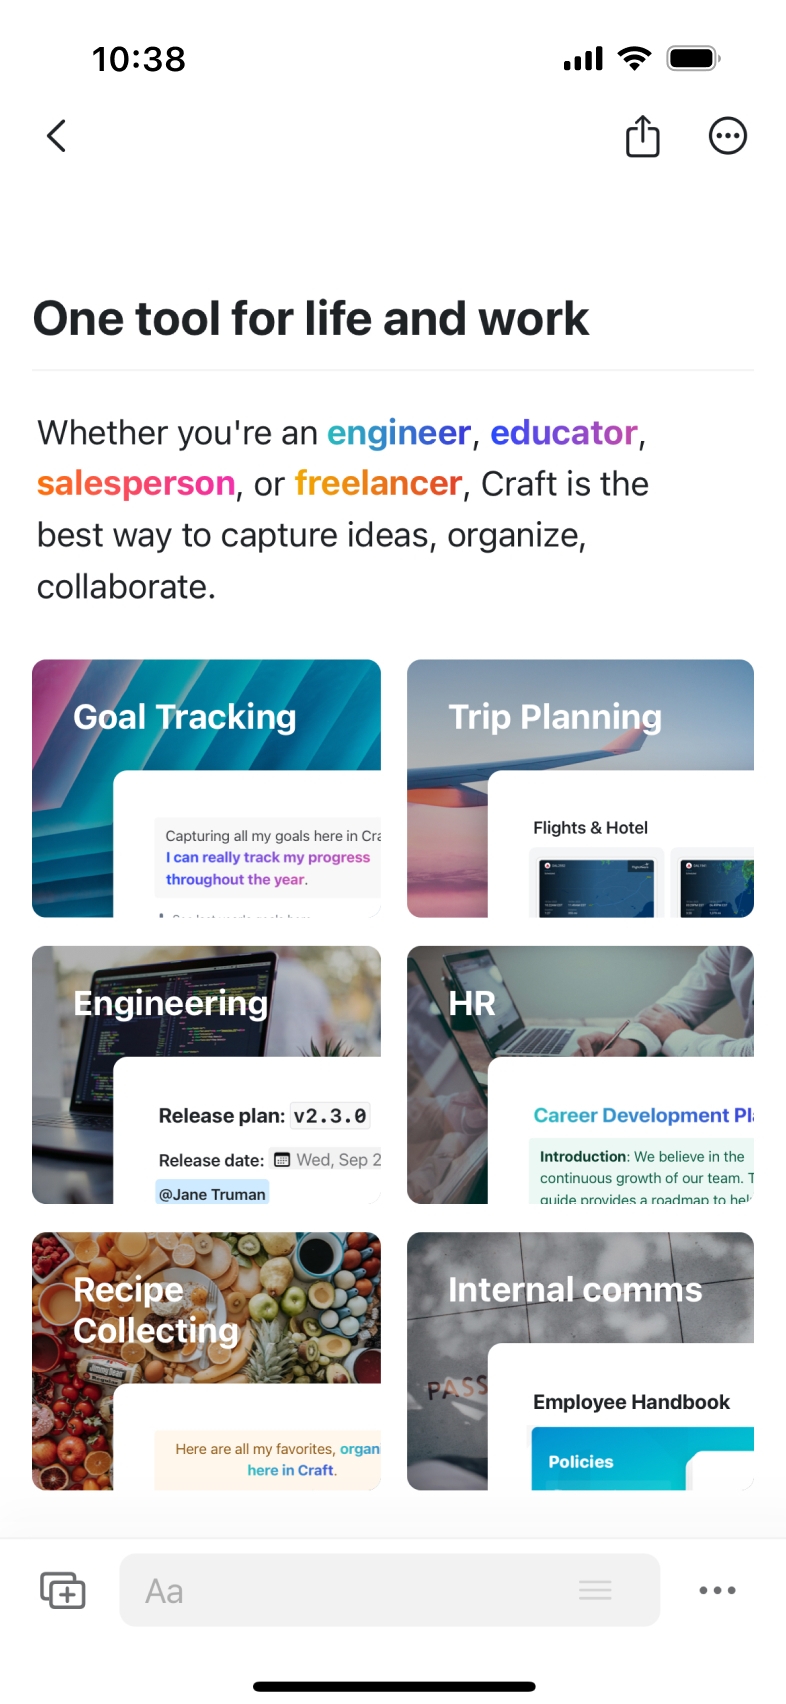 Whether you're an engineer, educator, salesperson, or freelancer, Craft is the best way to organize your work, share ideas and collaborate with your whole team.